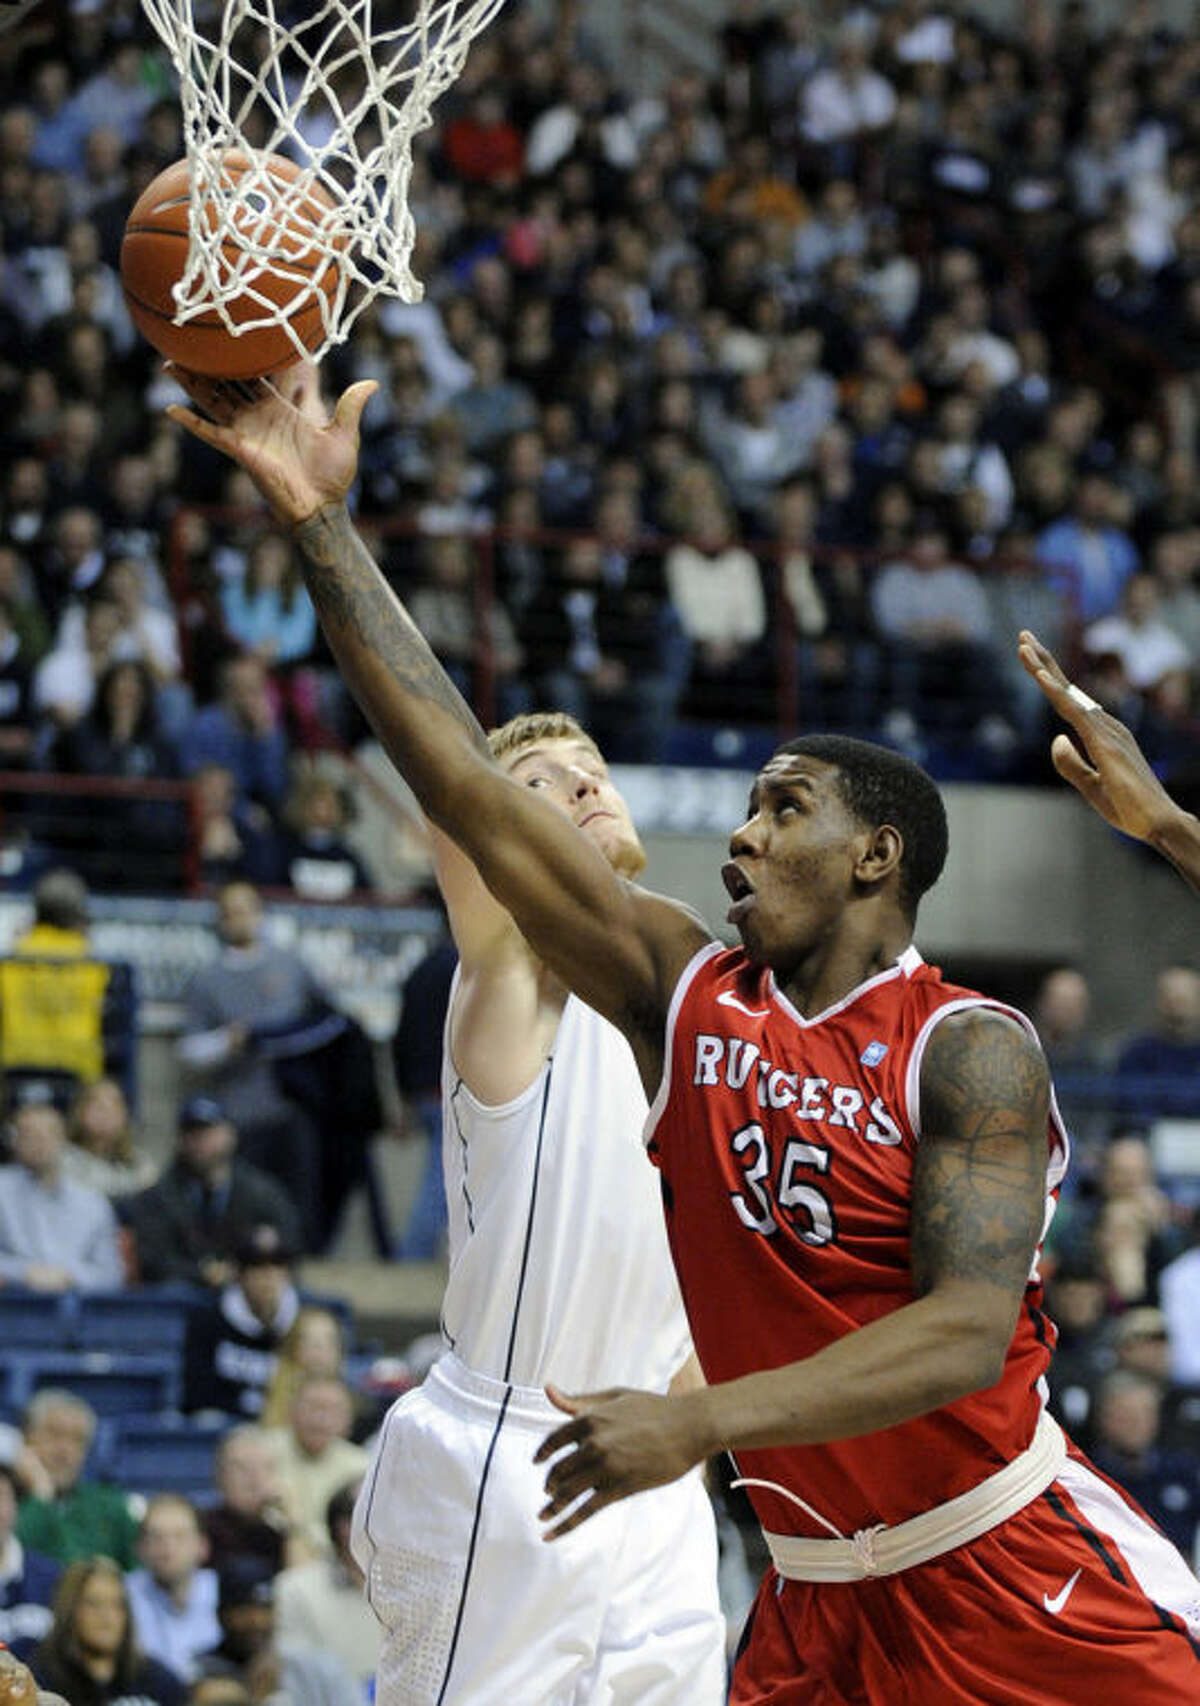 Rutgers' Greg Lewis (35) drives past Connecticut's Niels Giffey (5)during the first half of an NCAA college basketball game in Storrs, Conn., Wednesday, March 5, 2014. (AP Photo/Fred Beckham)